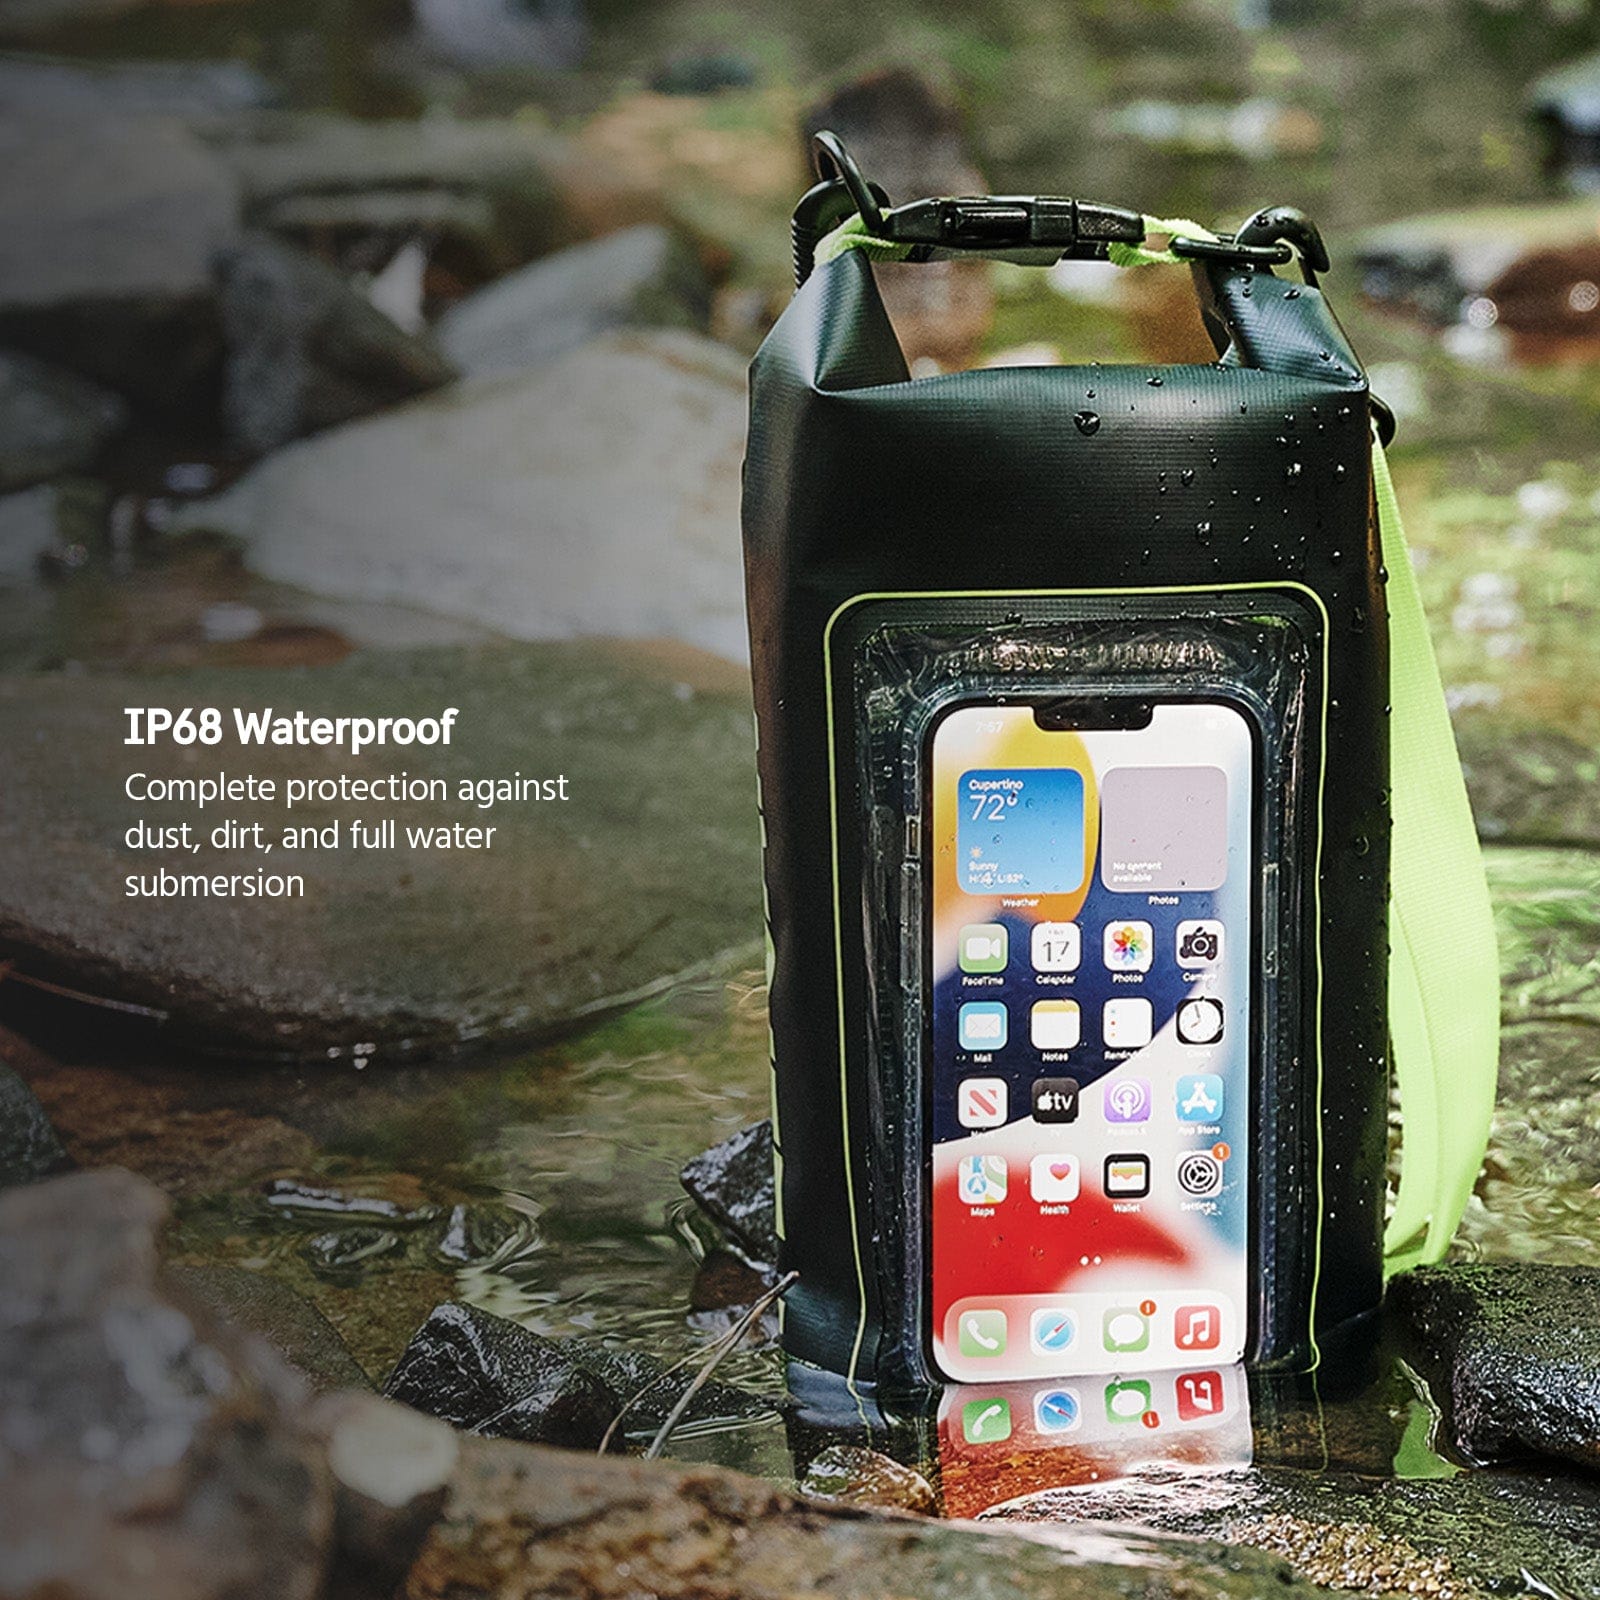 IP68 WATERPROOF. COMPLETE PROTECTION AGAINST DUST, DIRT, AND FULL WATER SUBMERSION